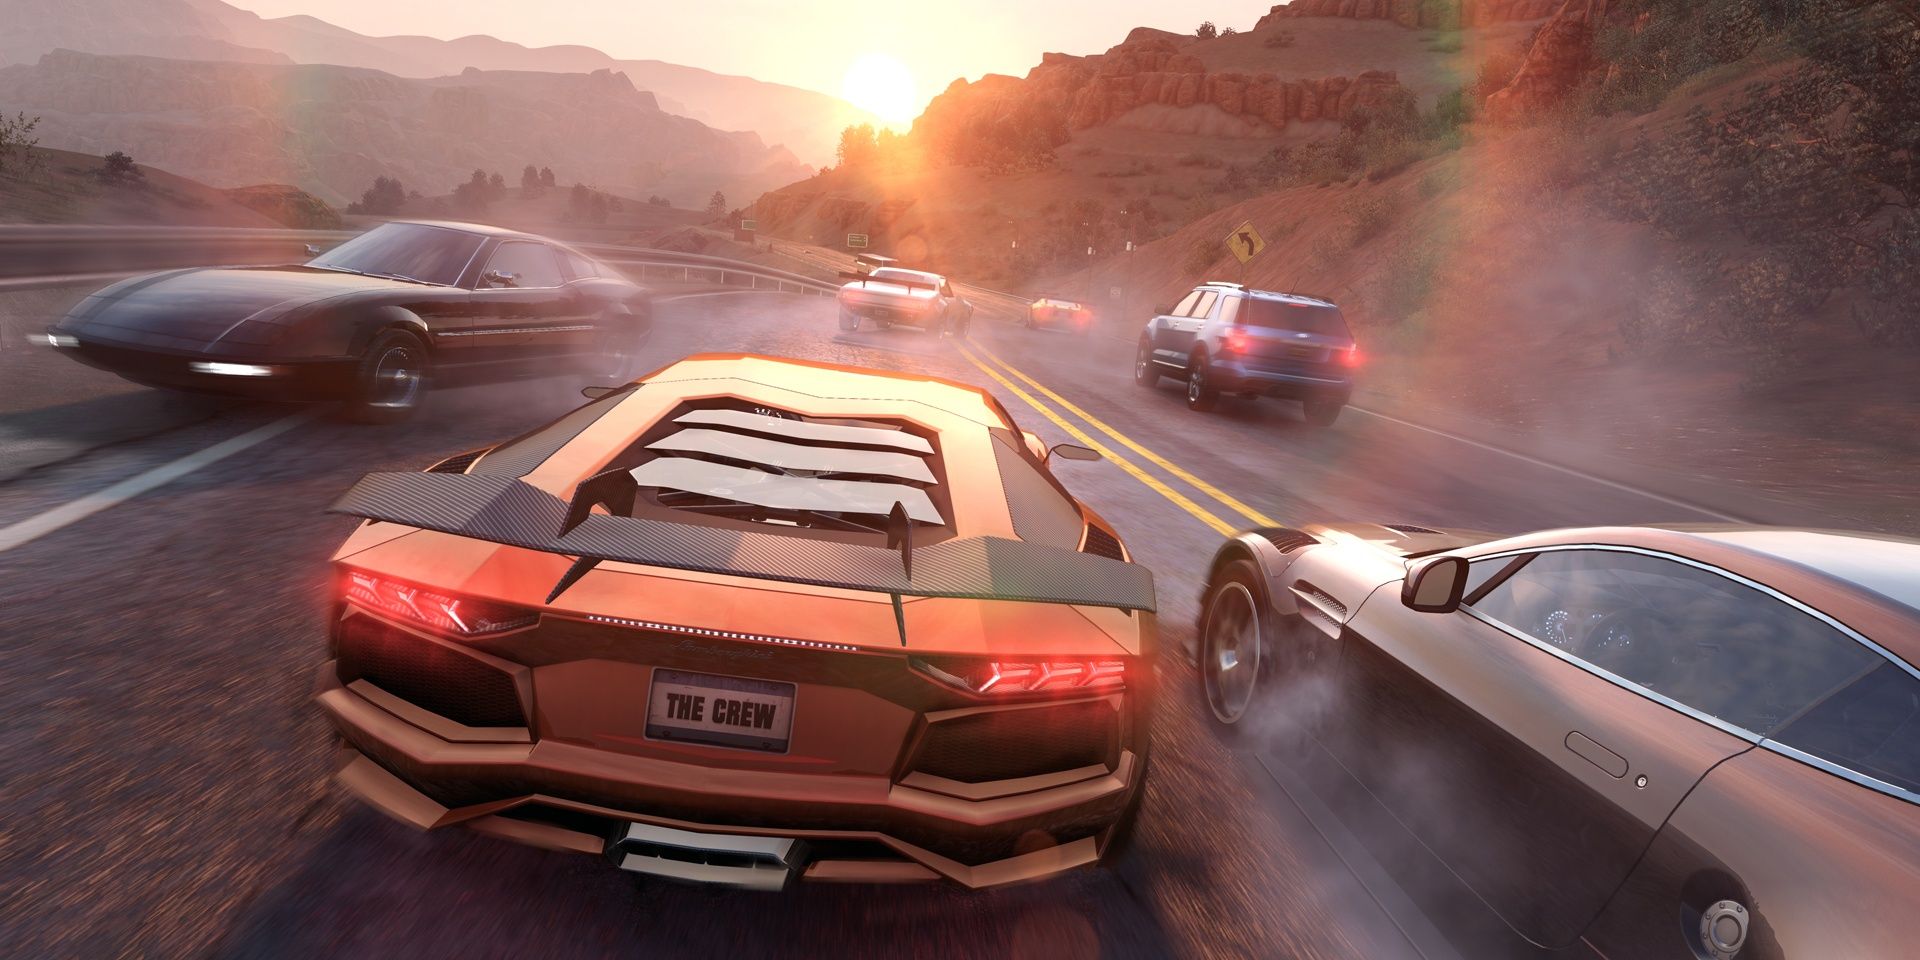 Cars drive on the road side by side in The Crew